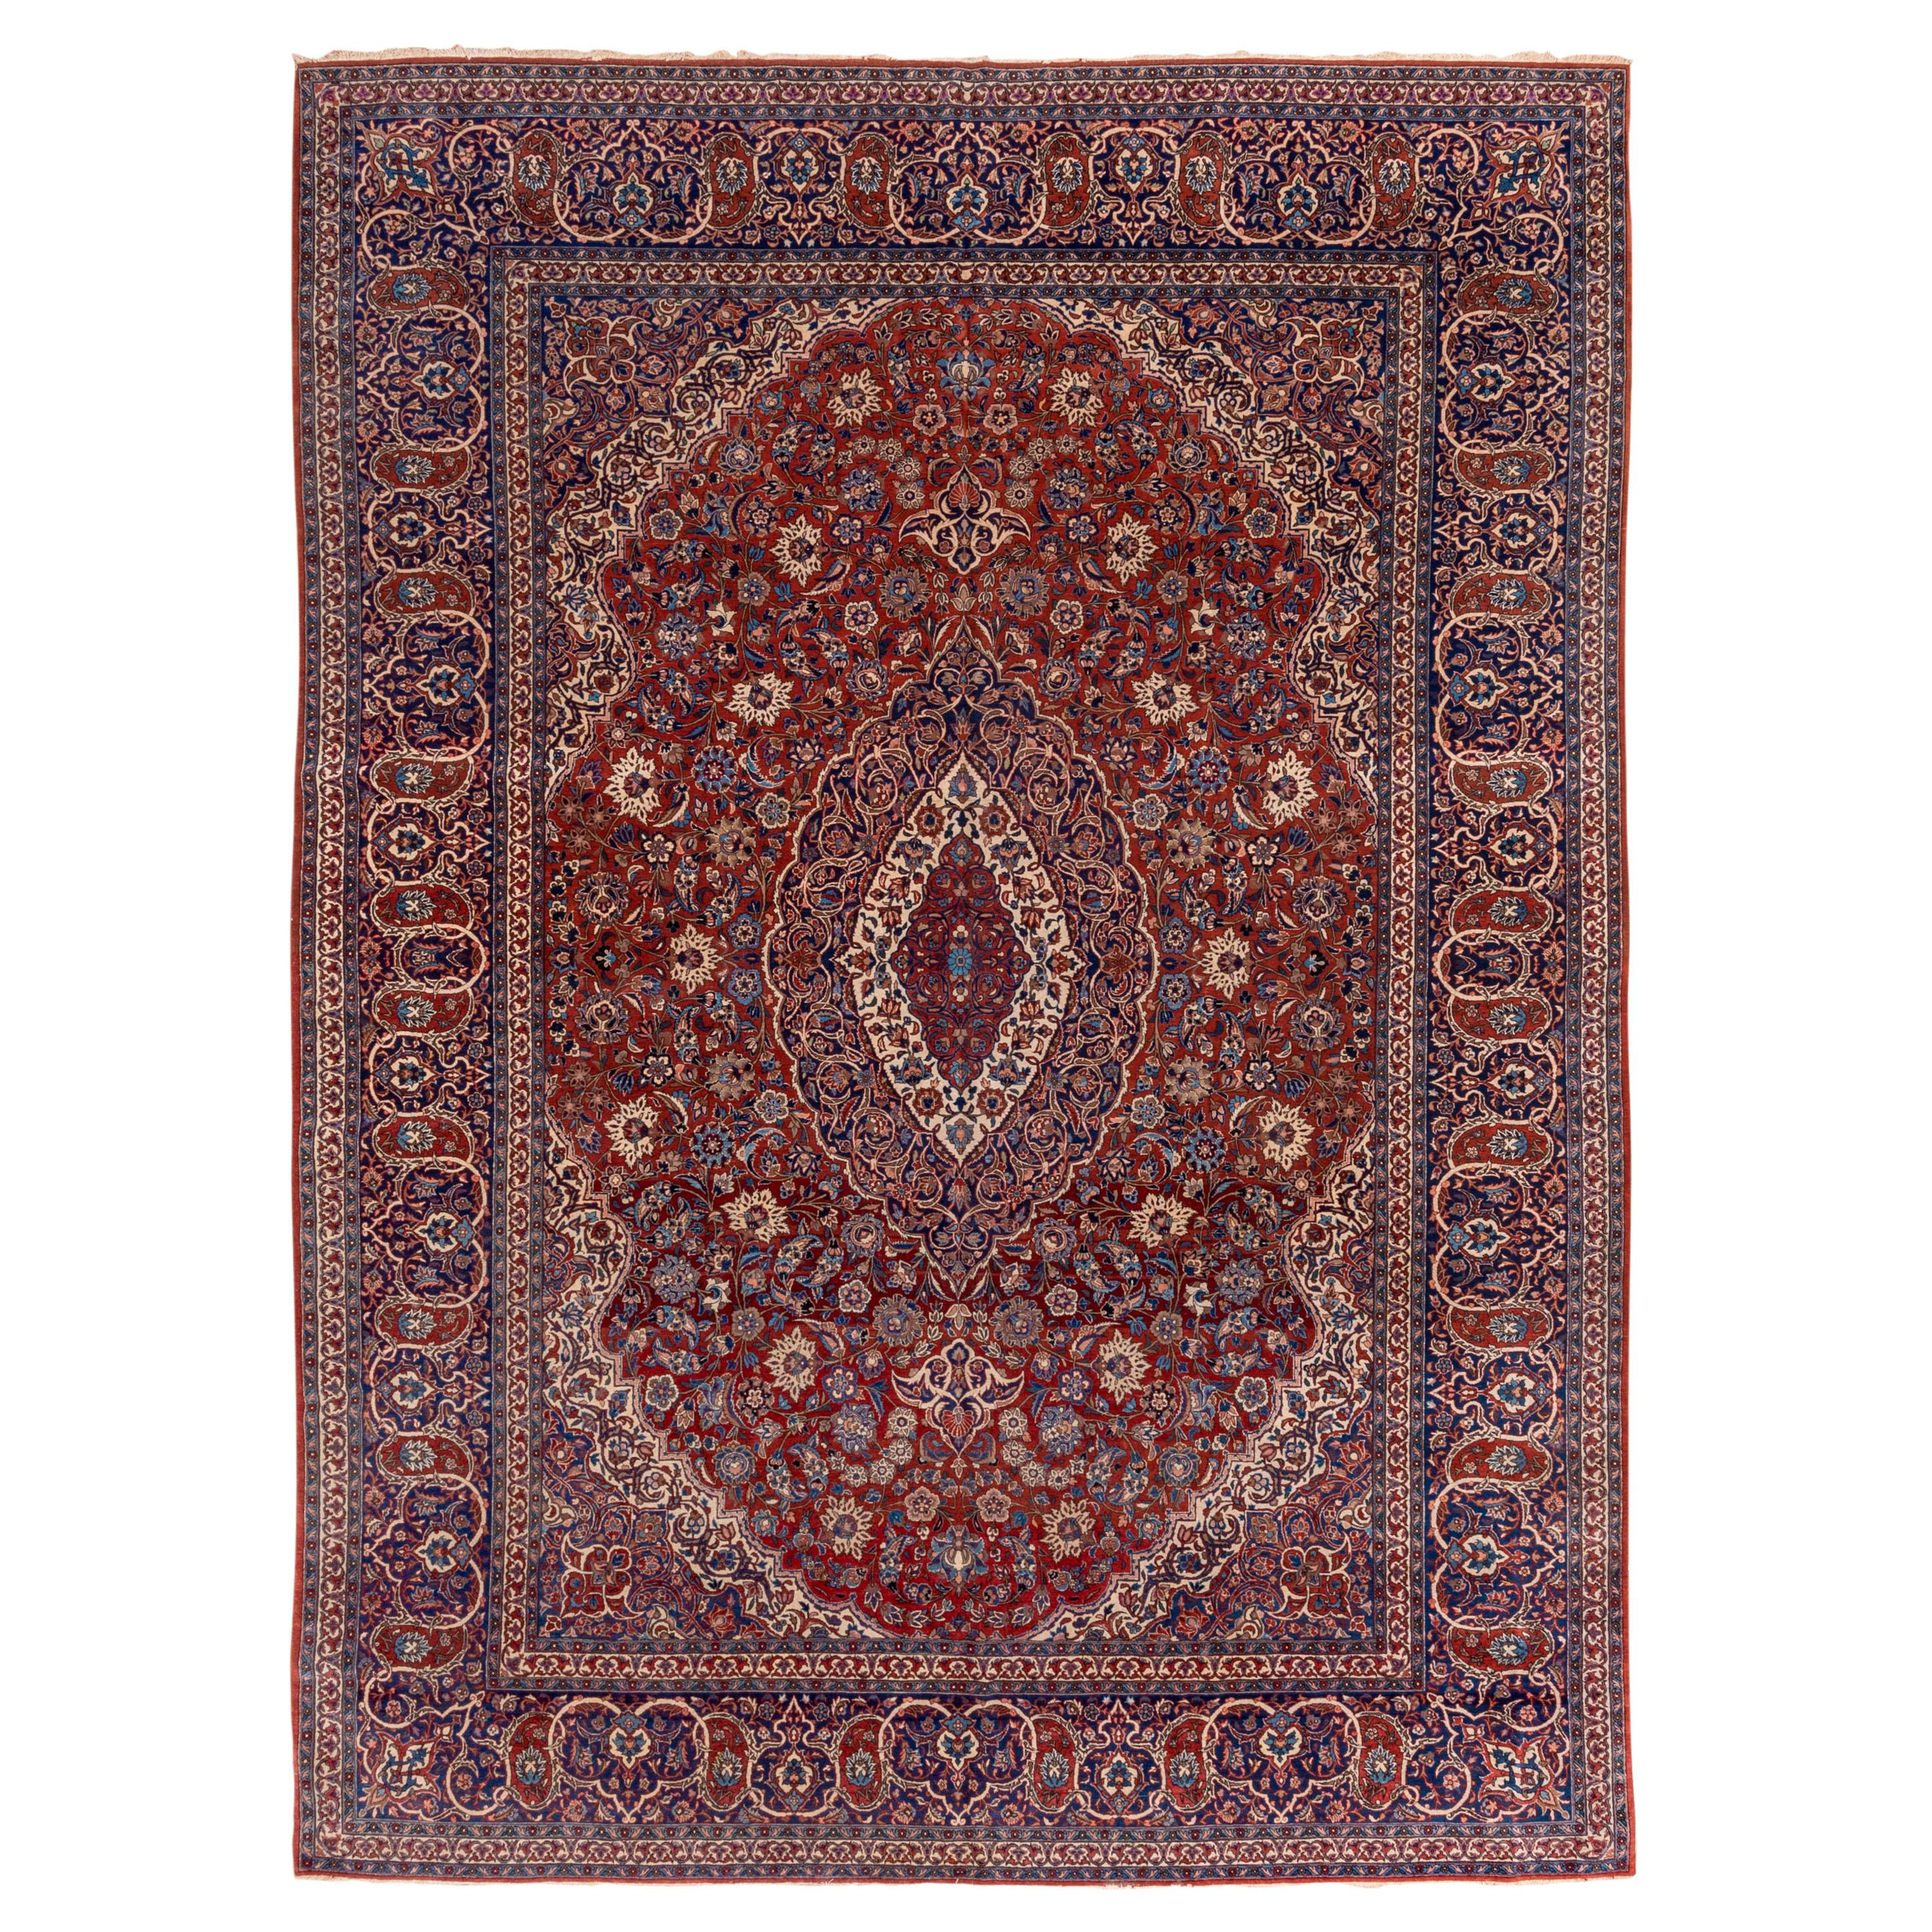 Fine Antique Persian Isfahan Carpet, Red Field, Center Medallion, Blue Accents